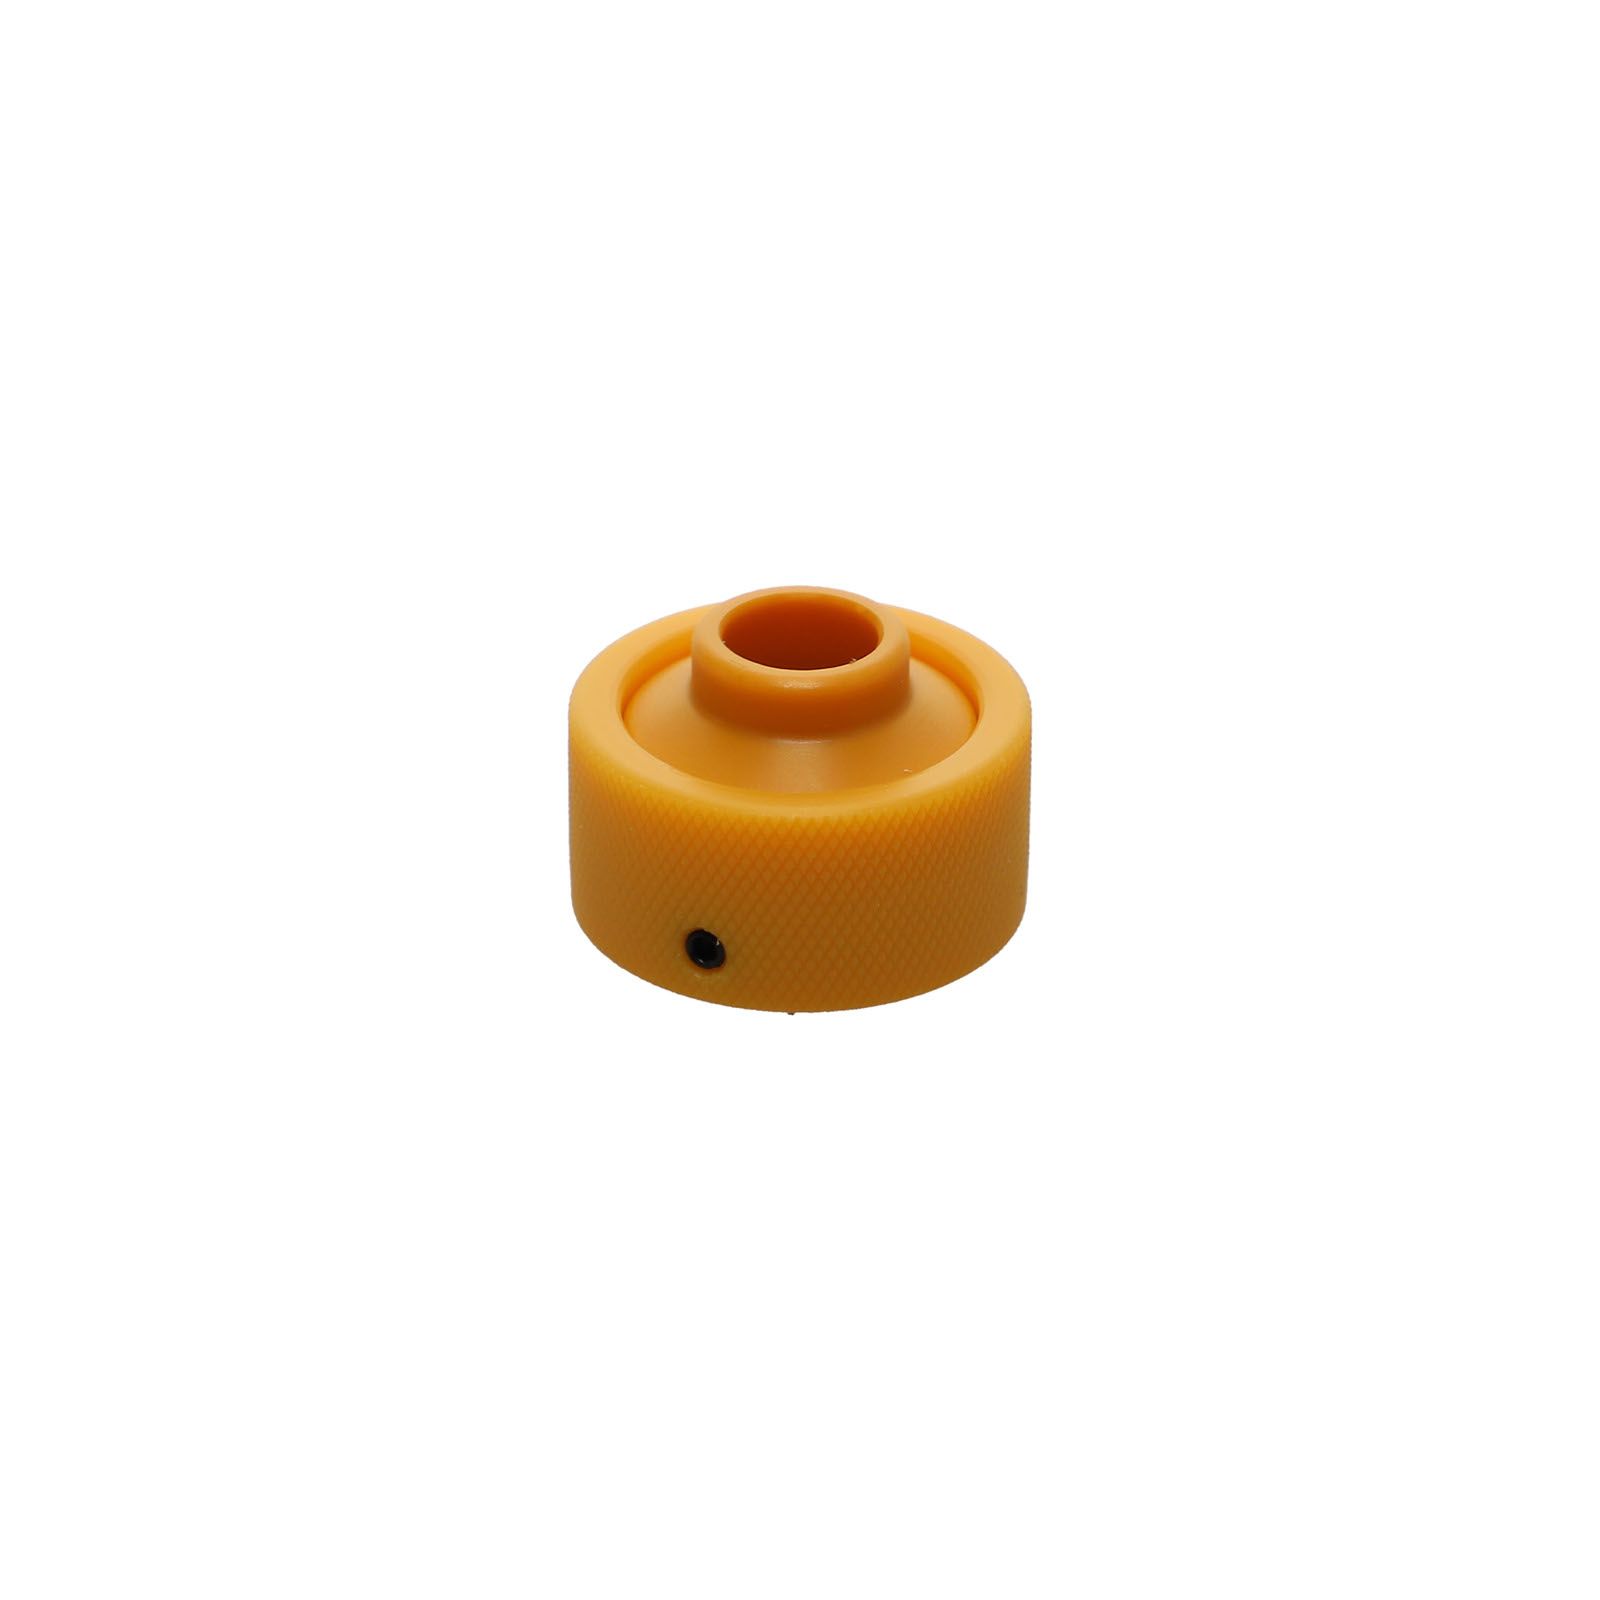 Tool cover-HEXE1/4-L20-d16.1-D10-R product photo